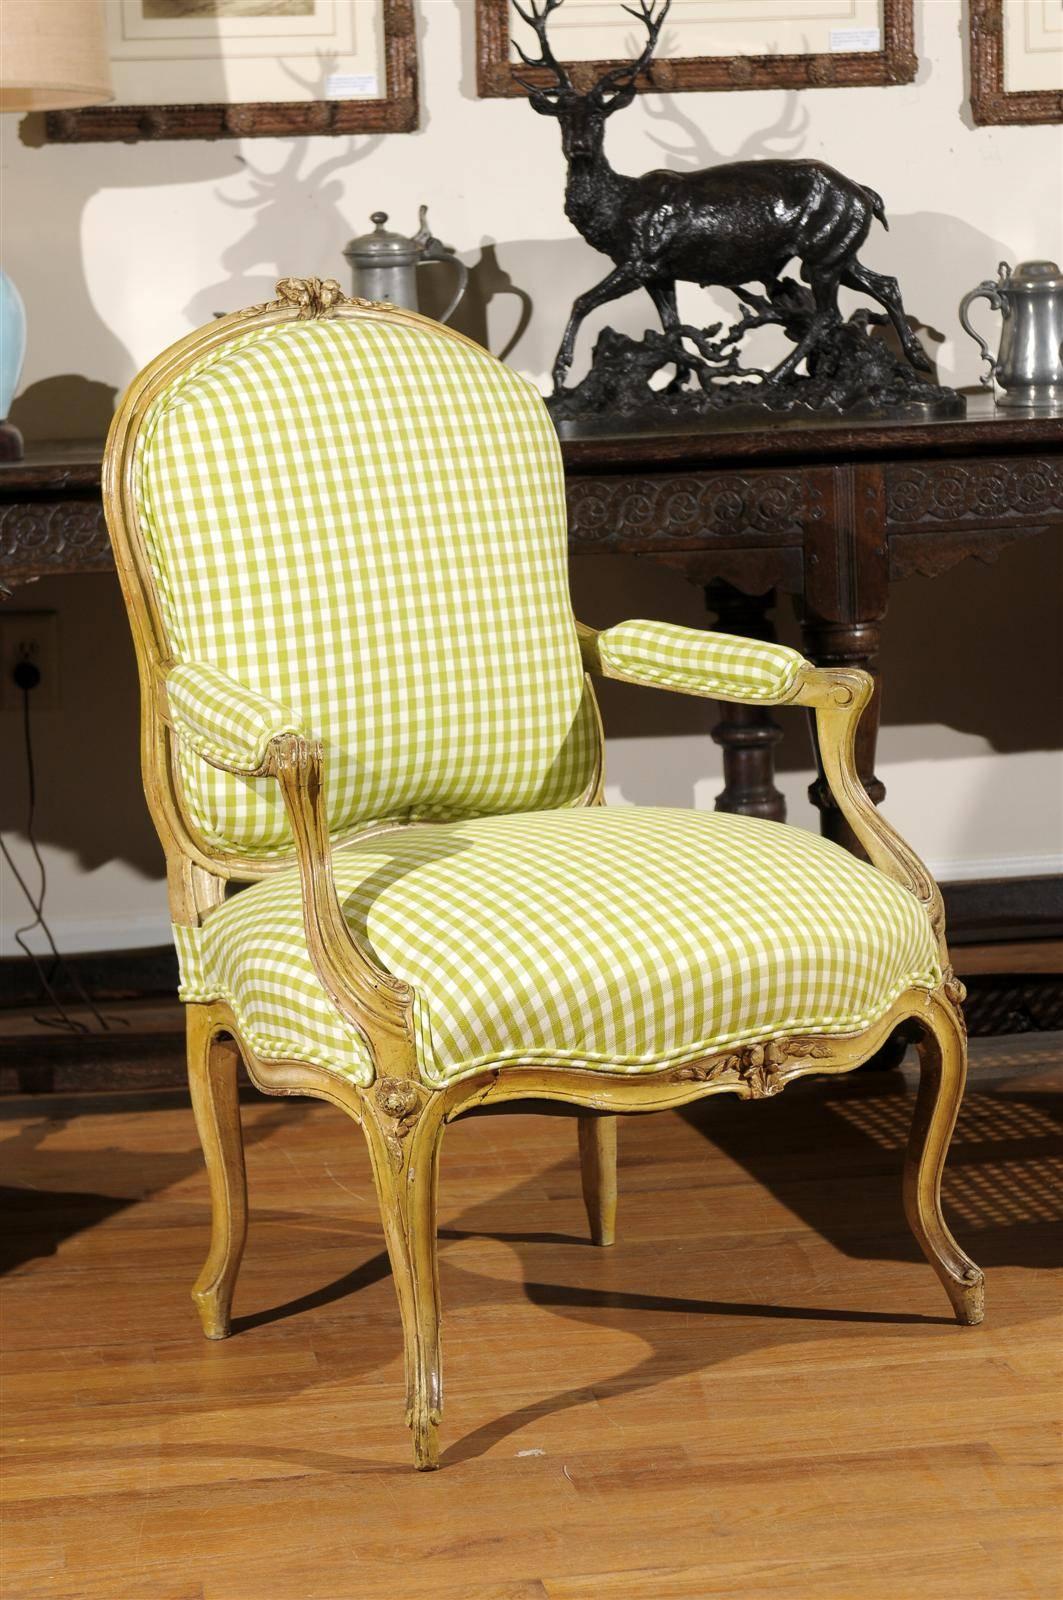 This is a newly upholstered French bergere armchair with padded armrests from the 1880s-1900s. The legs and arms are hand-carved with lovely flower embellishments.